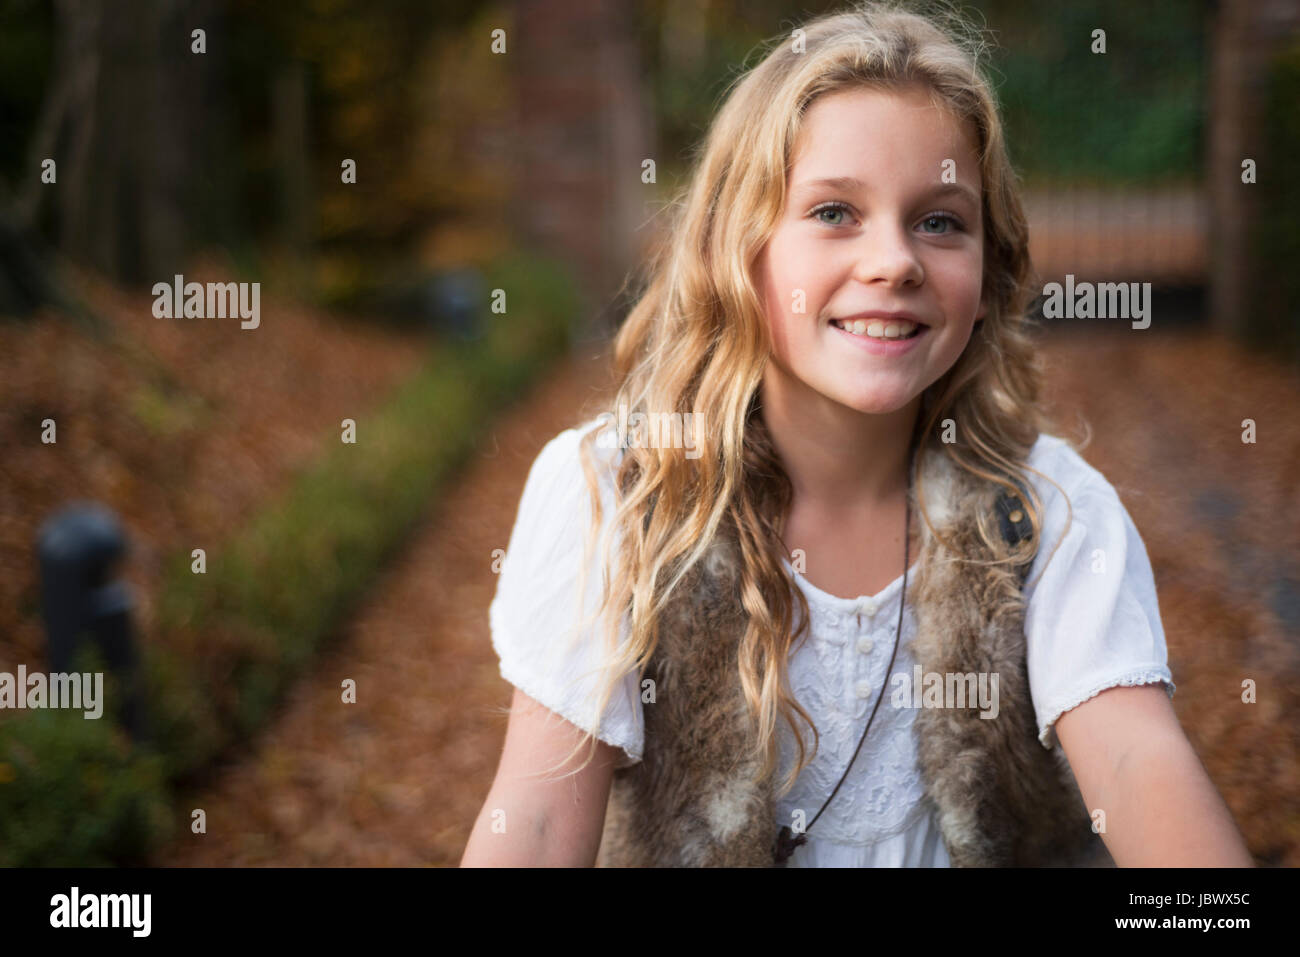 Portrait of blond haired girl in autumn park Stock Photo